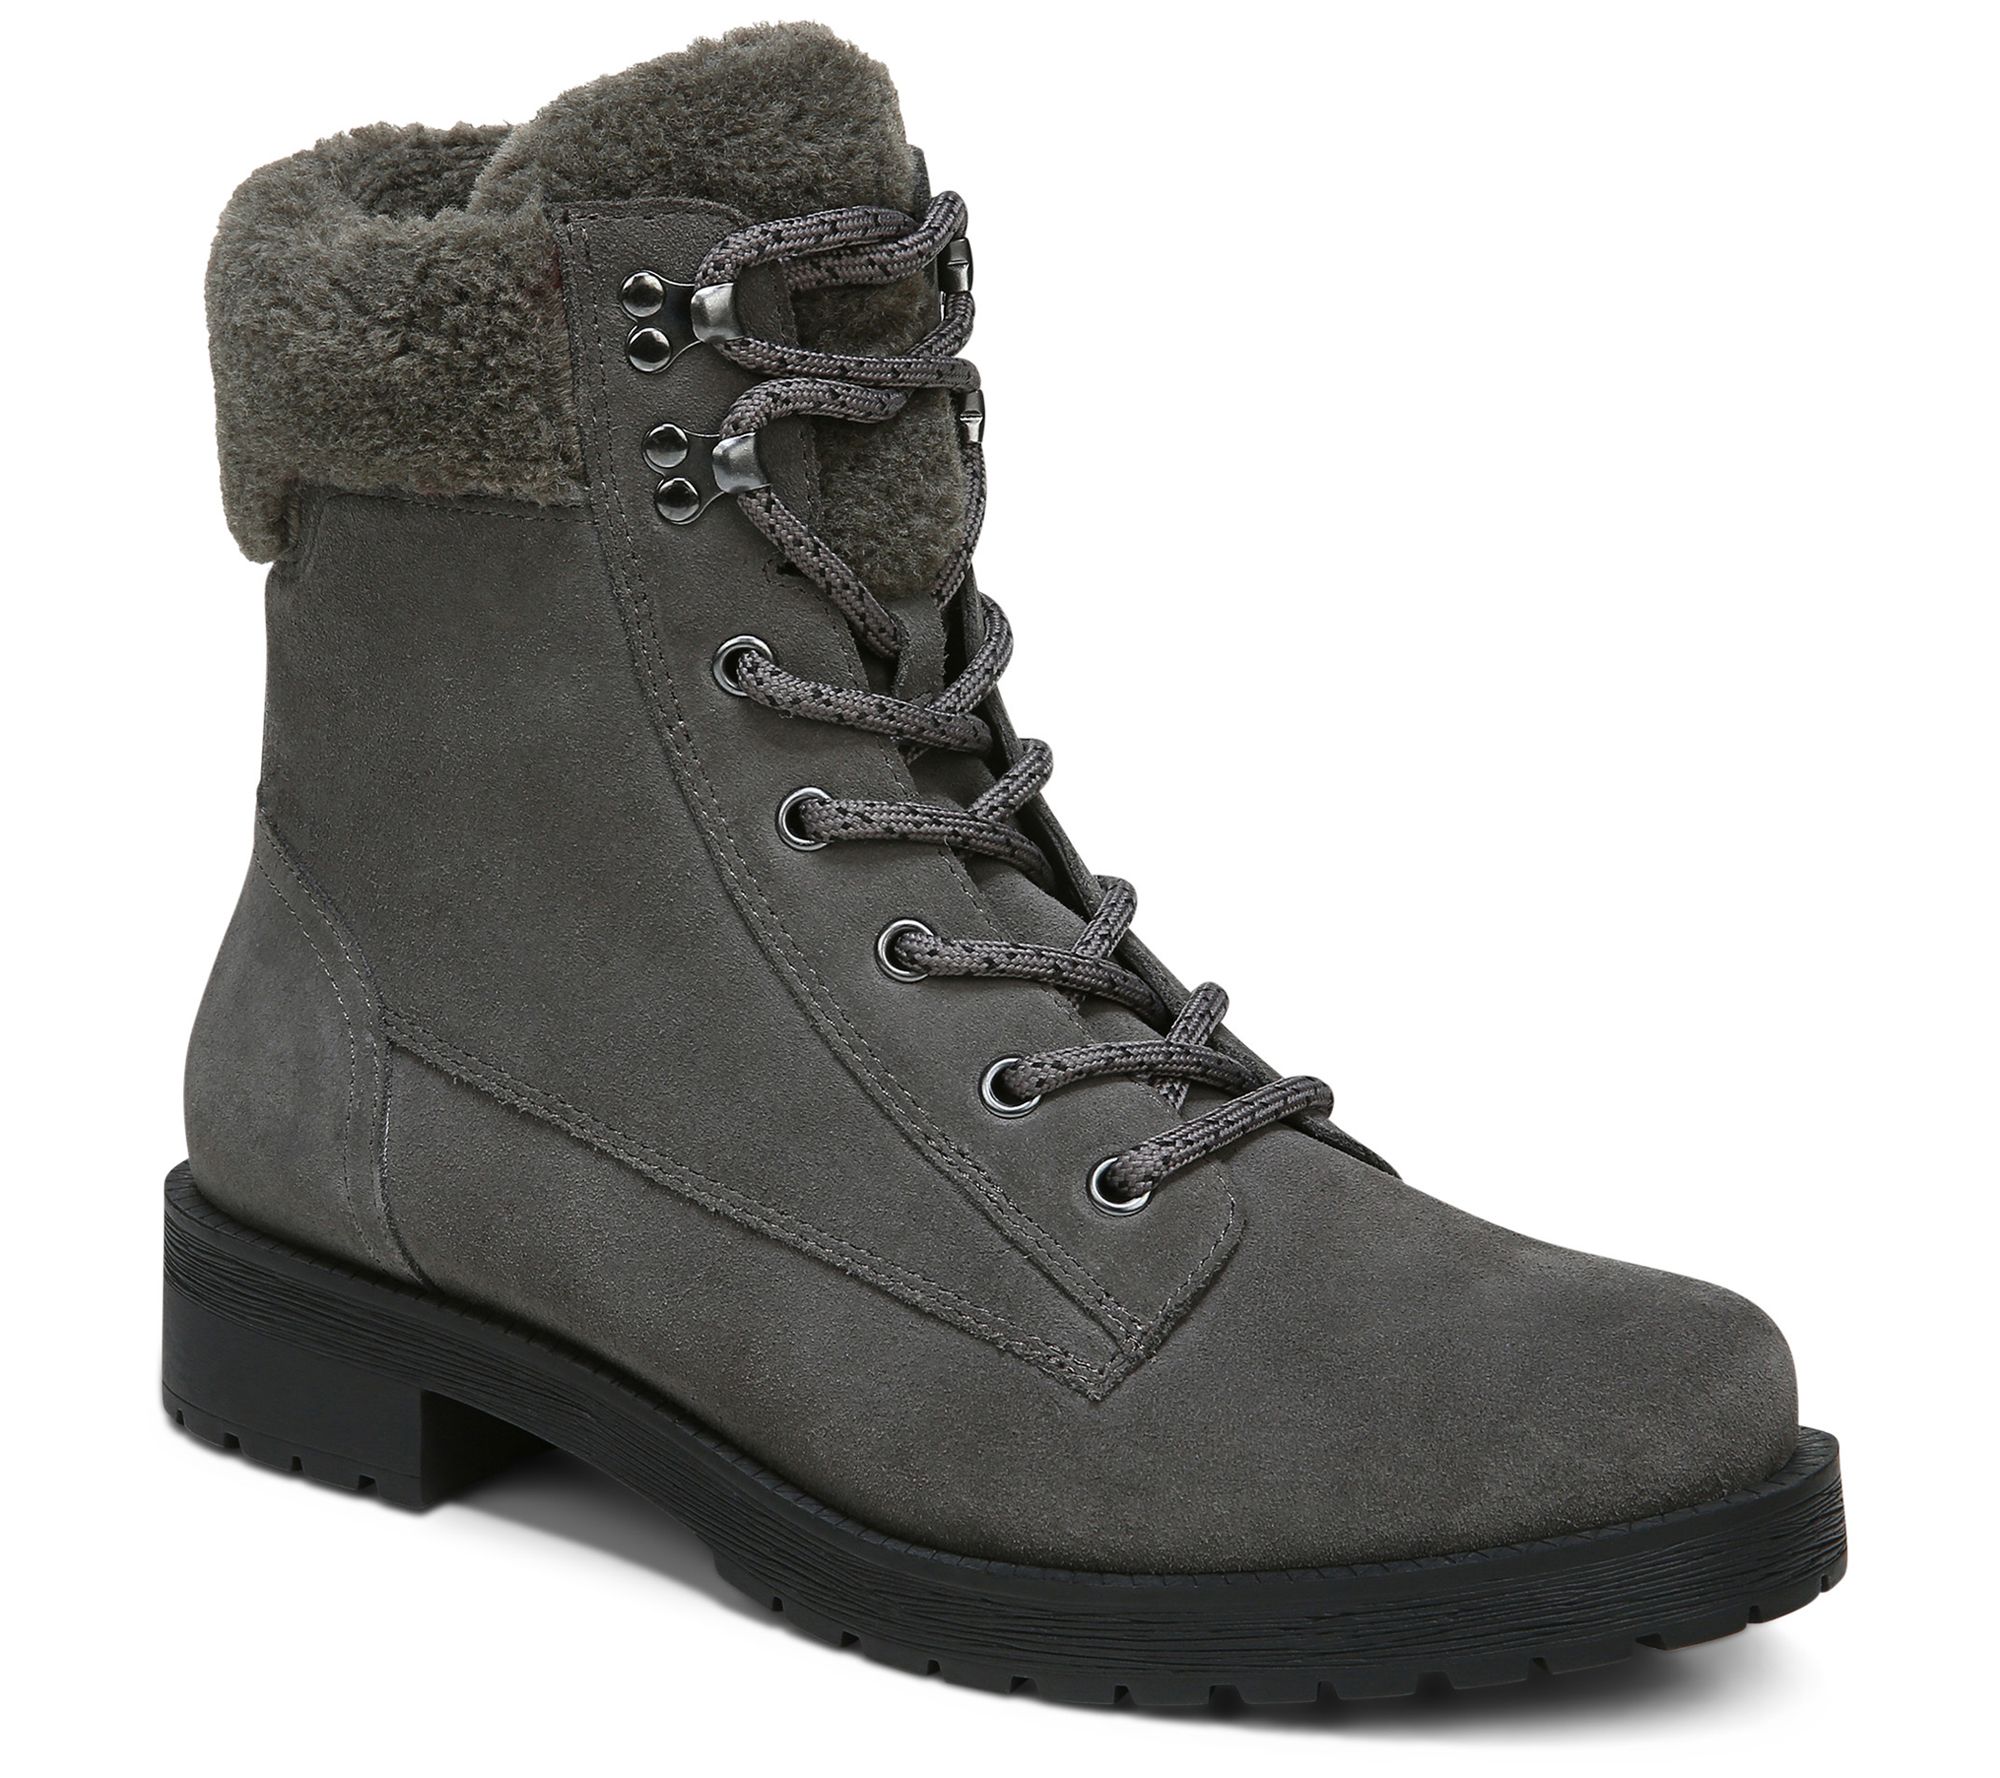 Vionic Water Resistant Suede Lace-Up Hiker Boots - Zoey - QVC.com